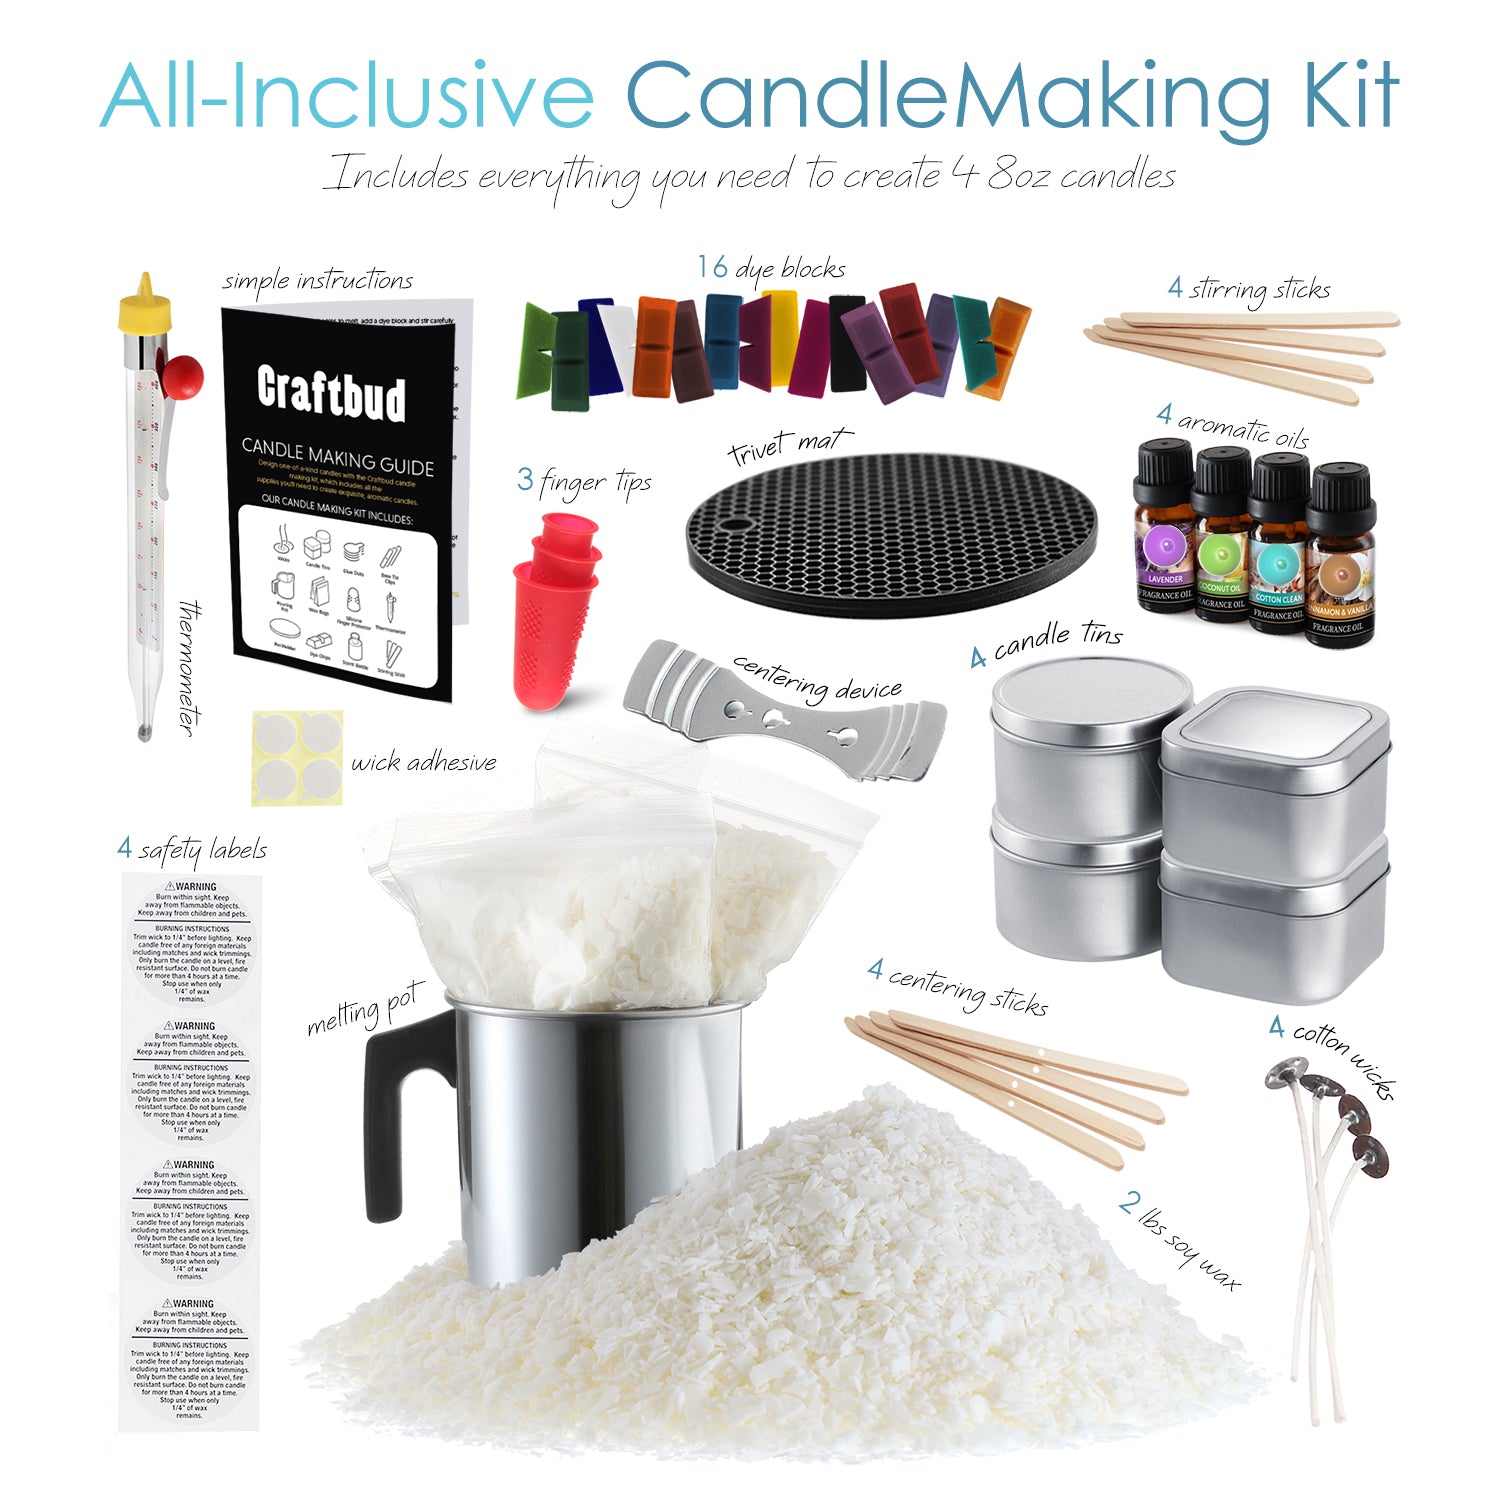 CraftBud Soy Candle Making Kit with Dried Flowers - 50 Pieces - Candle Wax  for Candle Making - 2lbs Natural Soy Wax, Tin, Cotton Wicks, Dried Flowers,  and Lot More